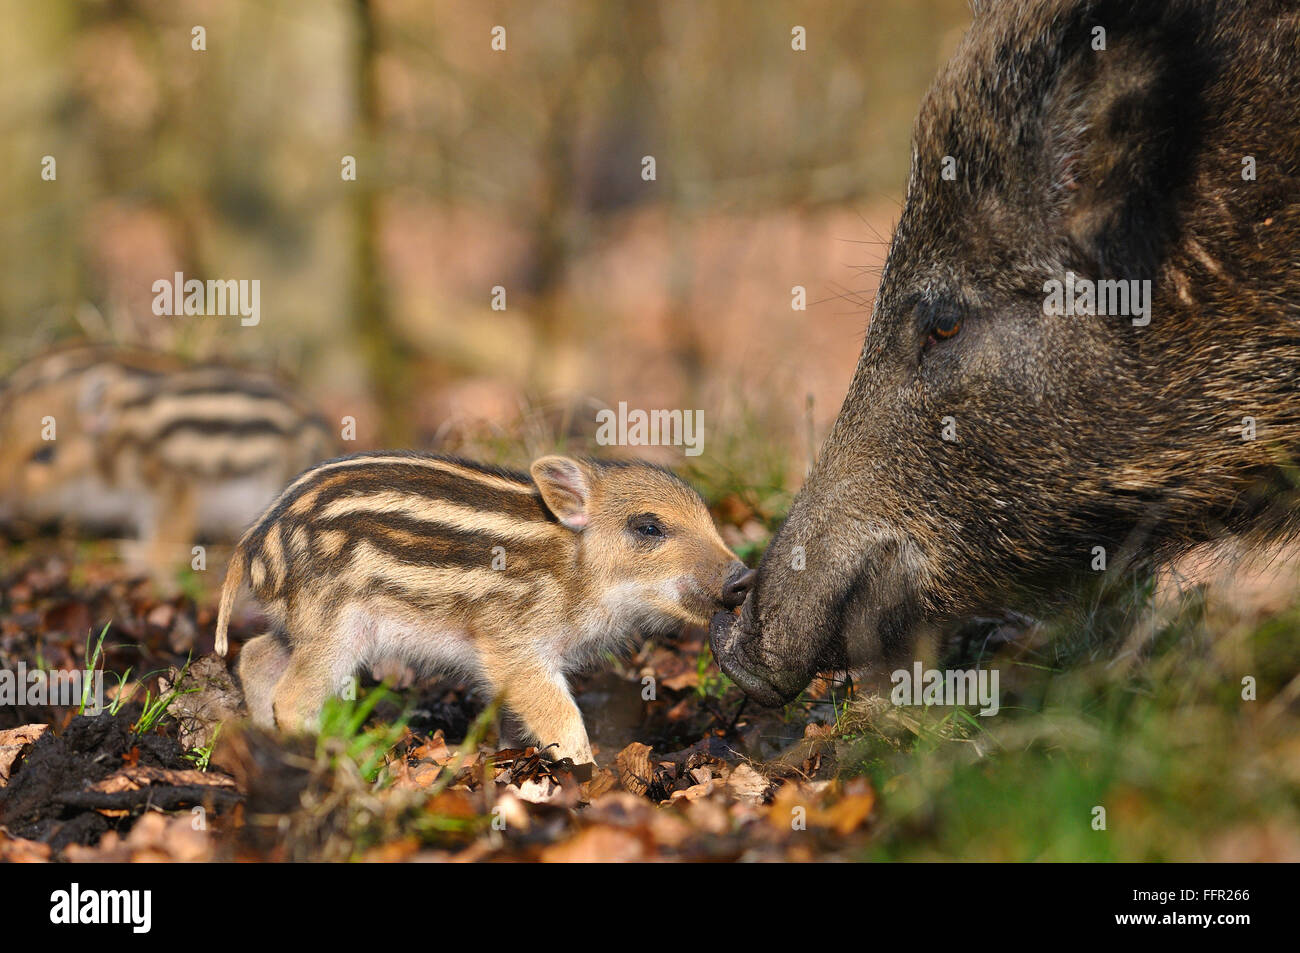 Wild boar (Sus scrofa), sow and piglet smelling each other, North Rhine-Westphalia, Germany Stock Photo